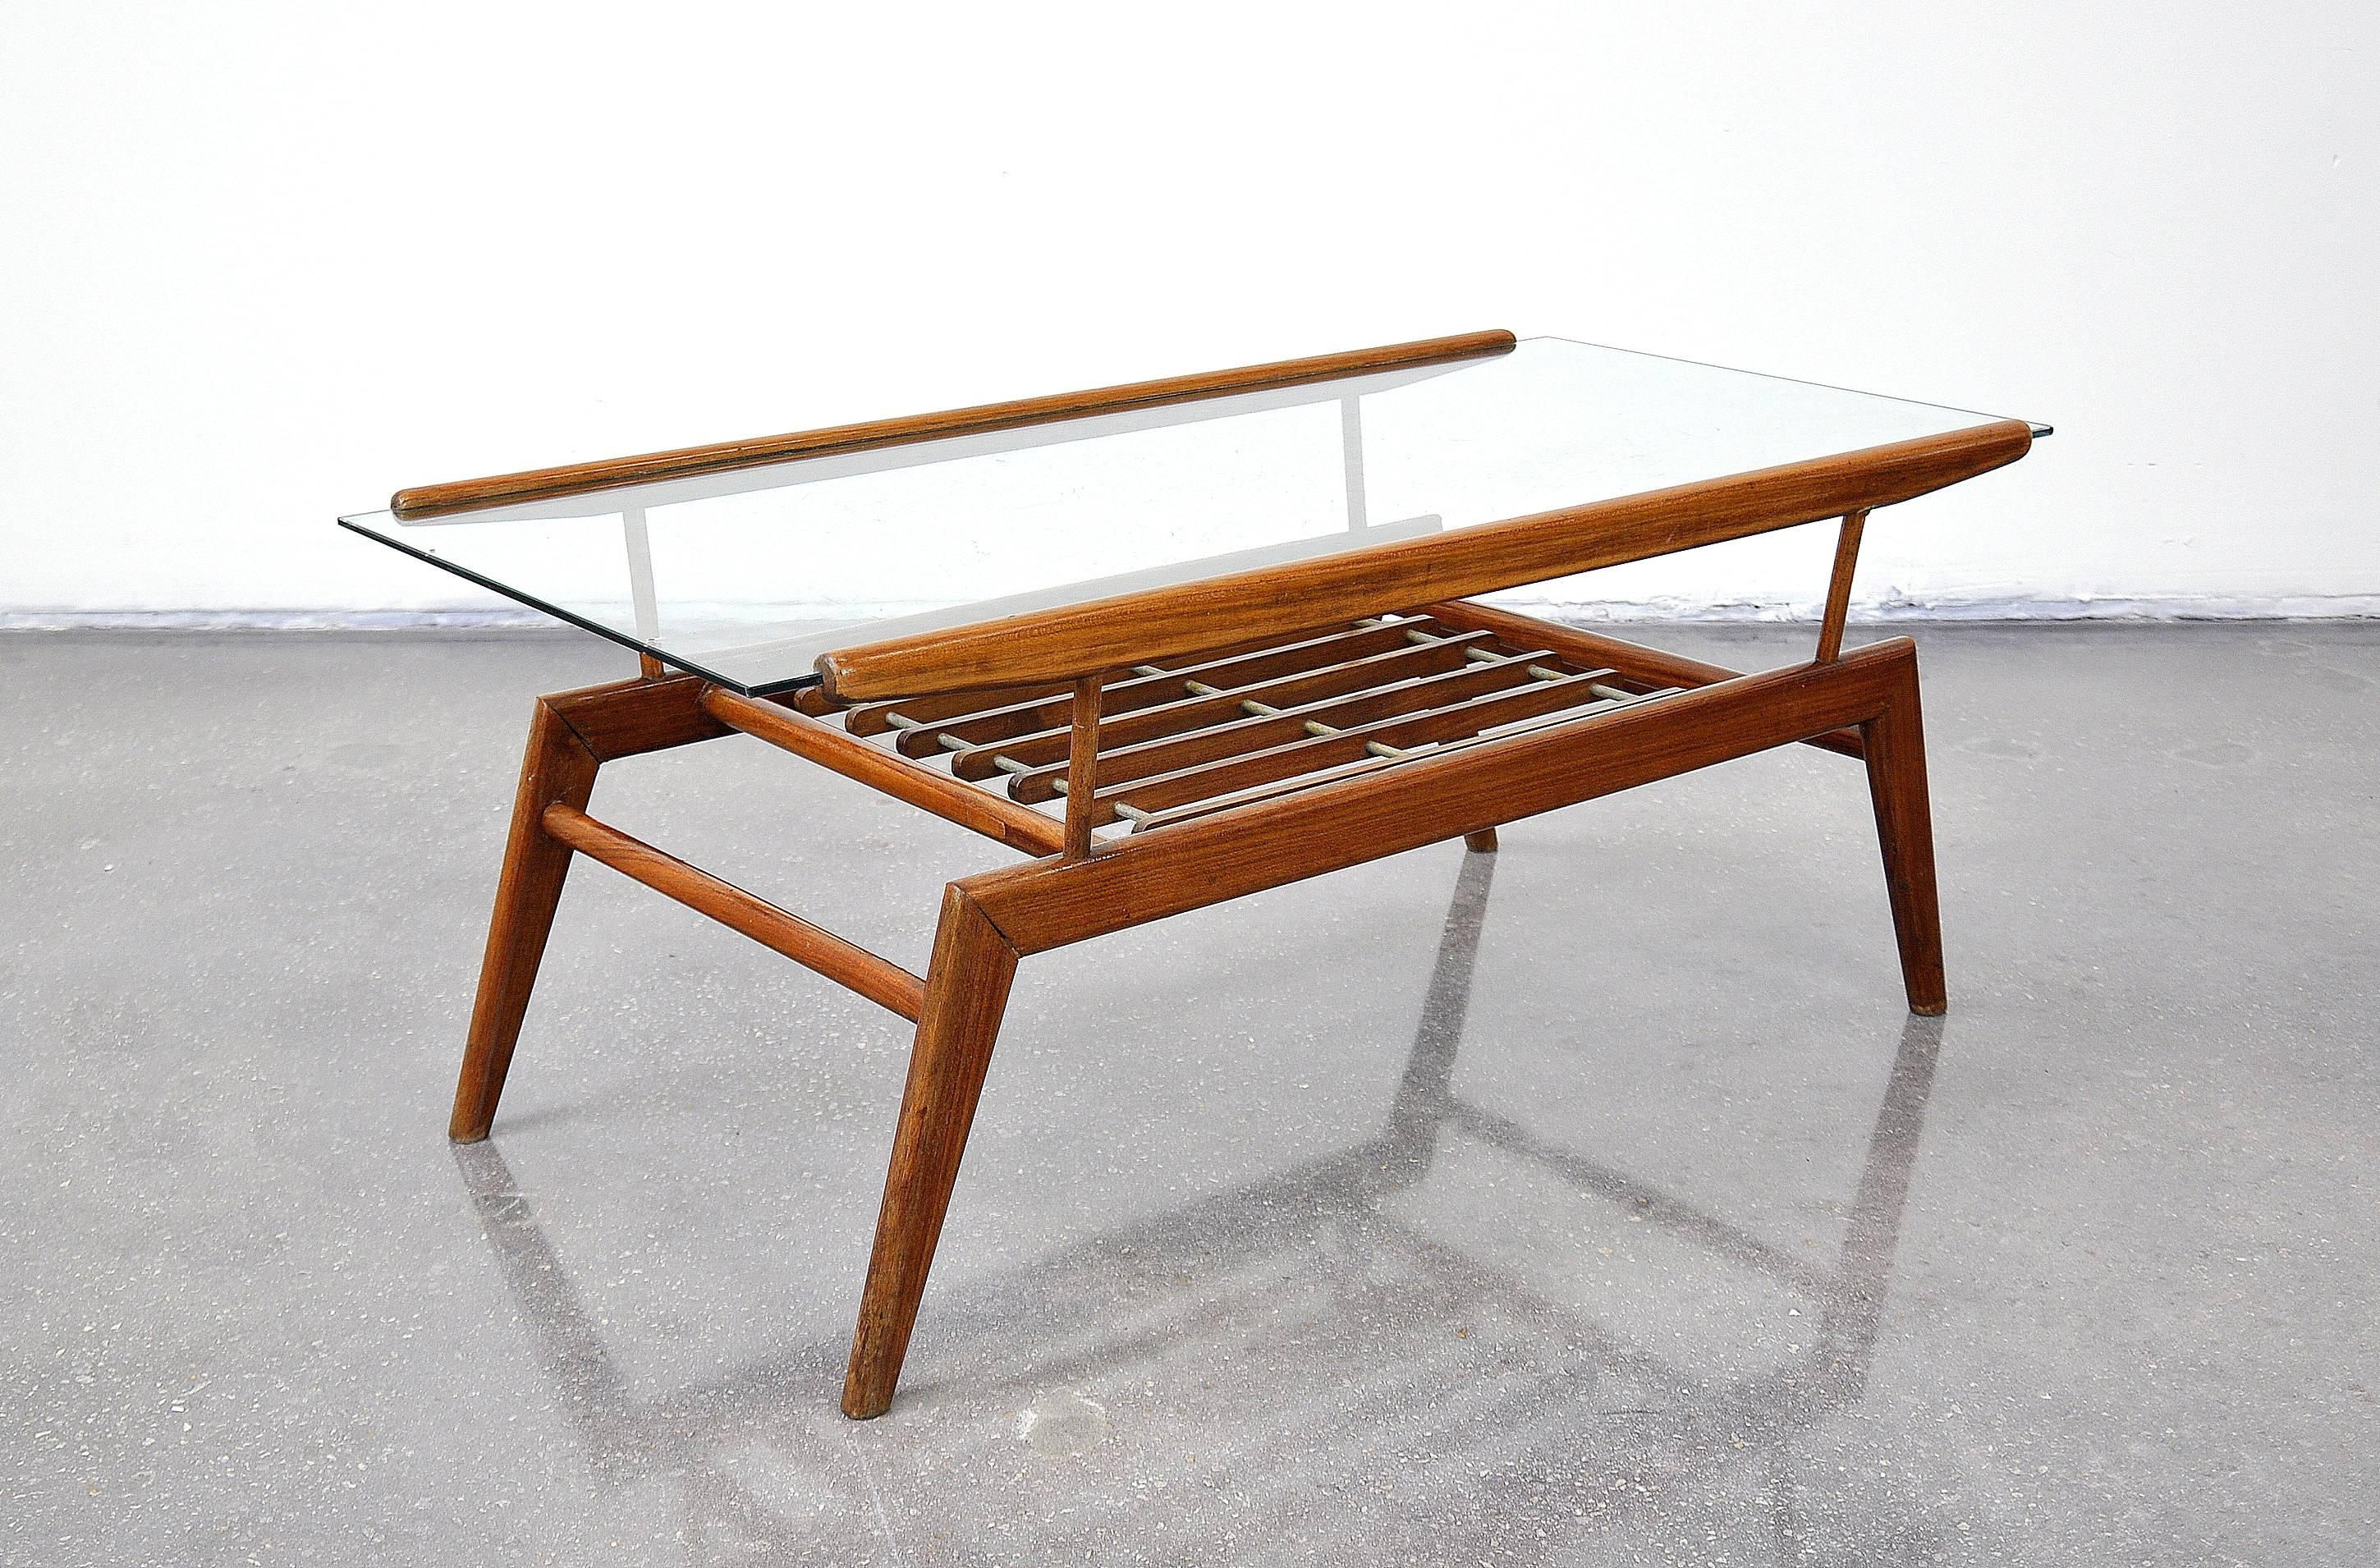 An early Italian Mid-Century Modern walnut and glass cocktail table, in the manner of Gio Ponti, dating from the late 1940s-early 1950s. The two-tier table features a striking architectural walnut frame with an inset glass top over a slatted